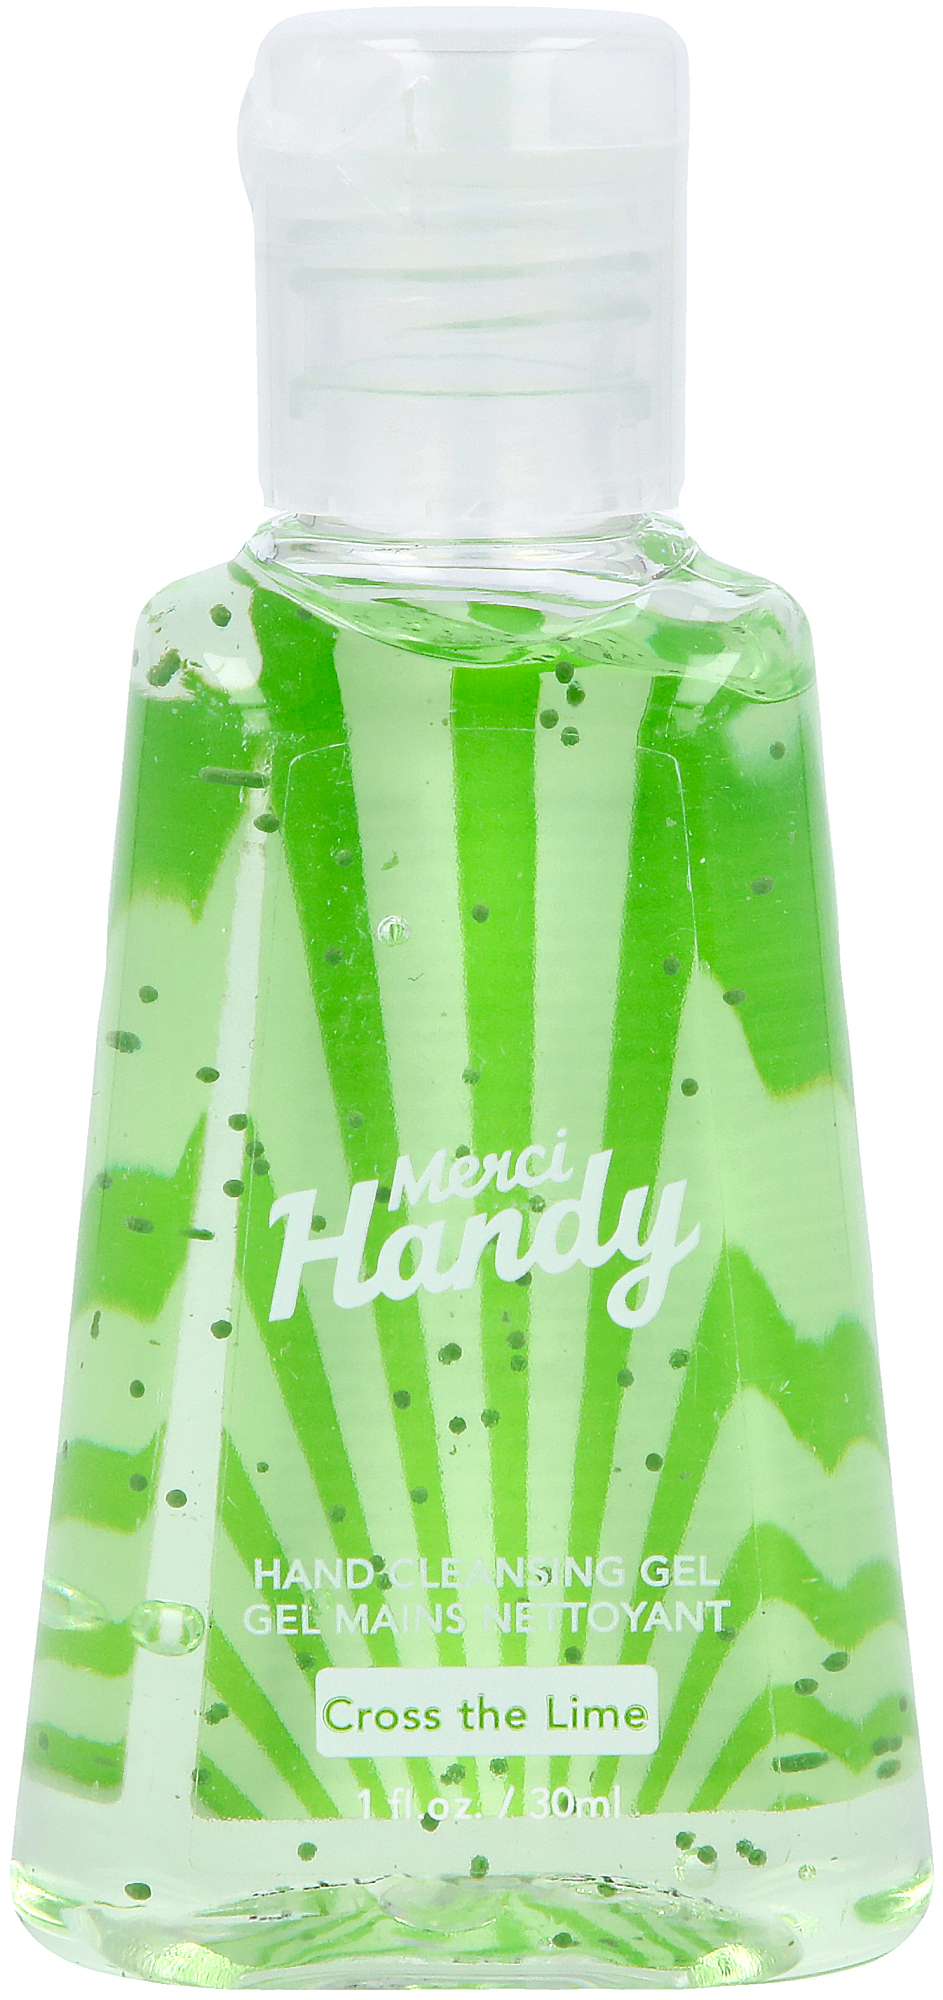 Merci Handy Hand Cleansing Gel 30ml (Various Fragrance)) - FREE Delivery